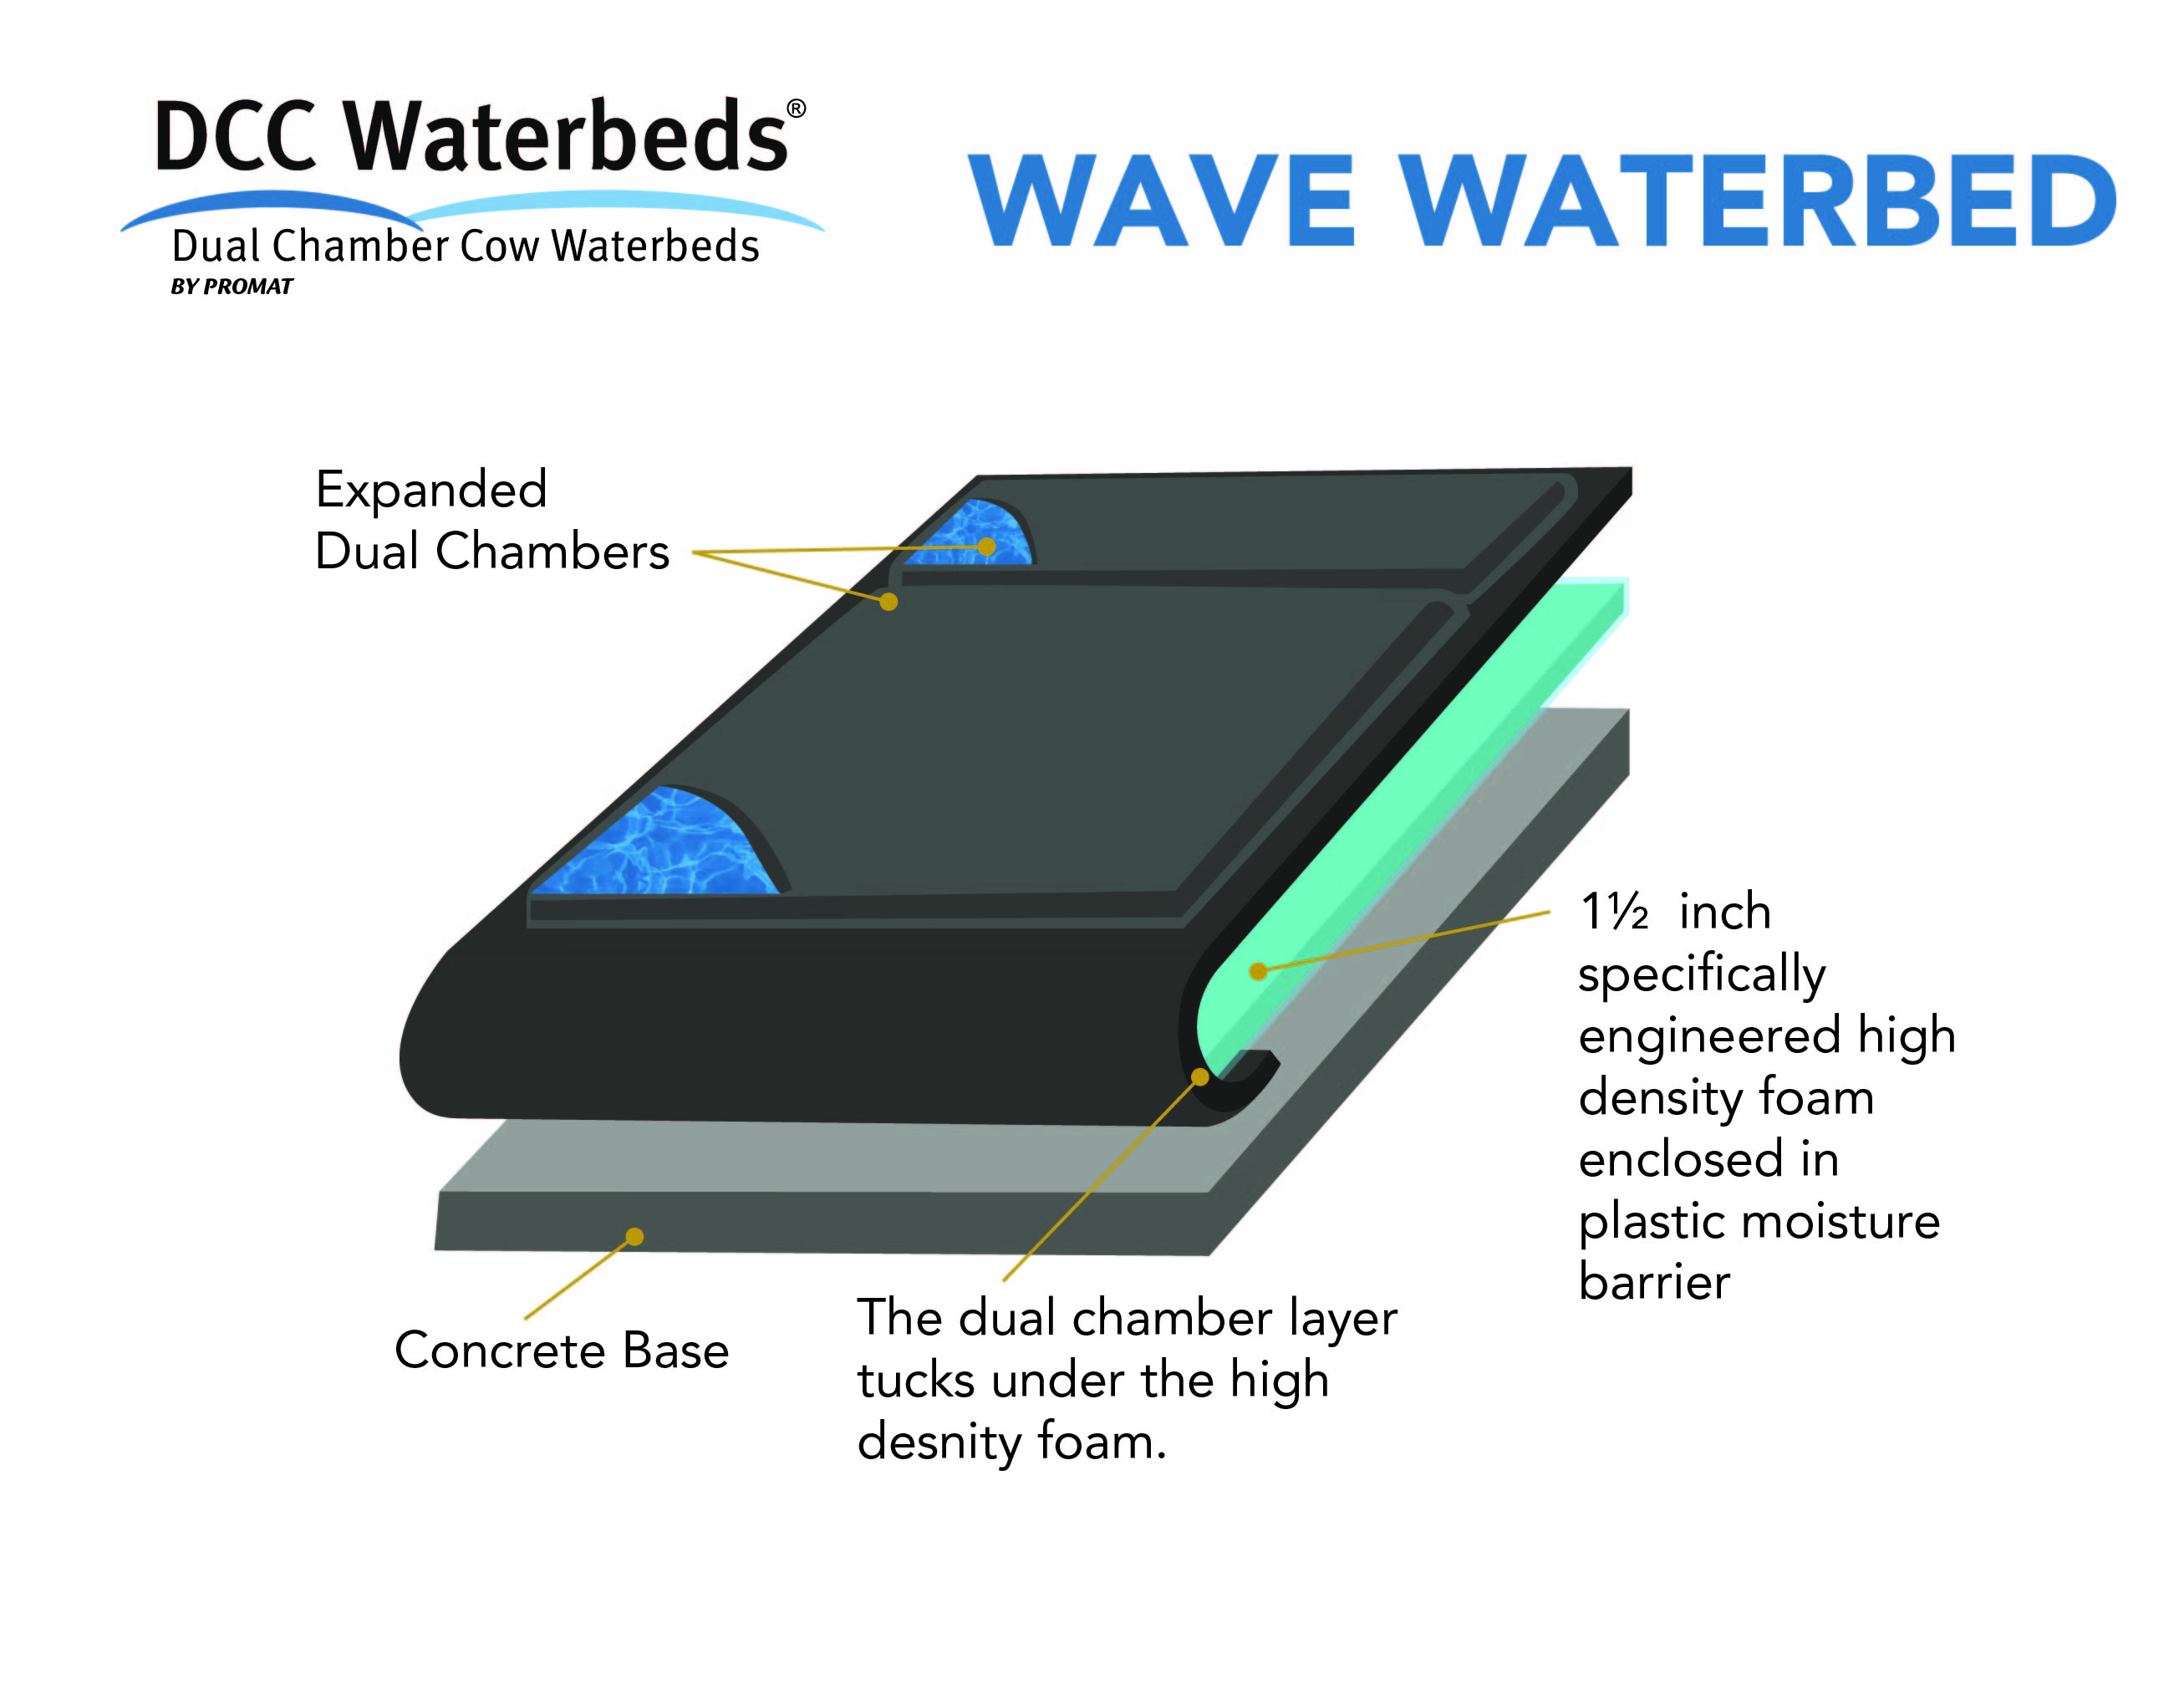 DCC Wave Waterbed